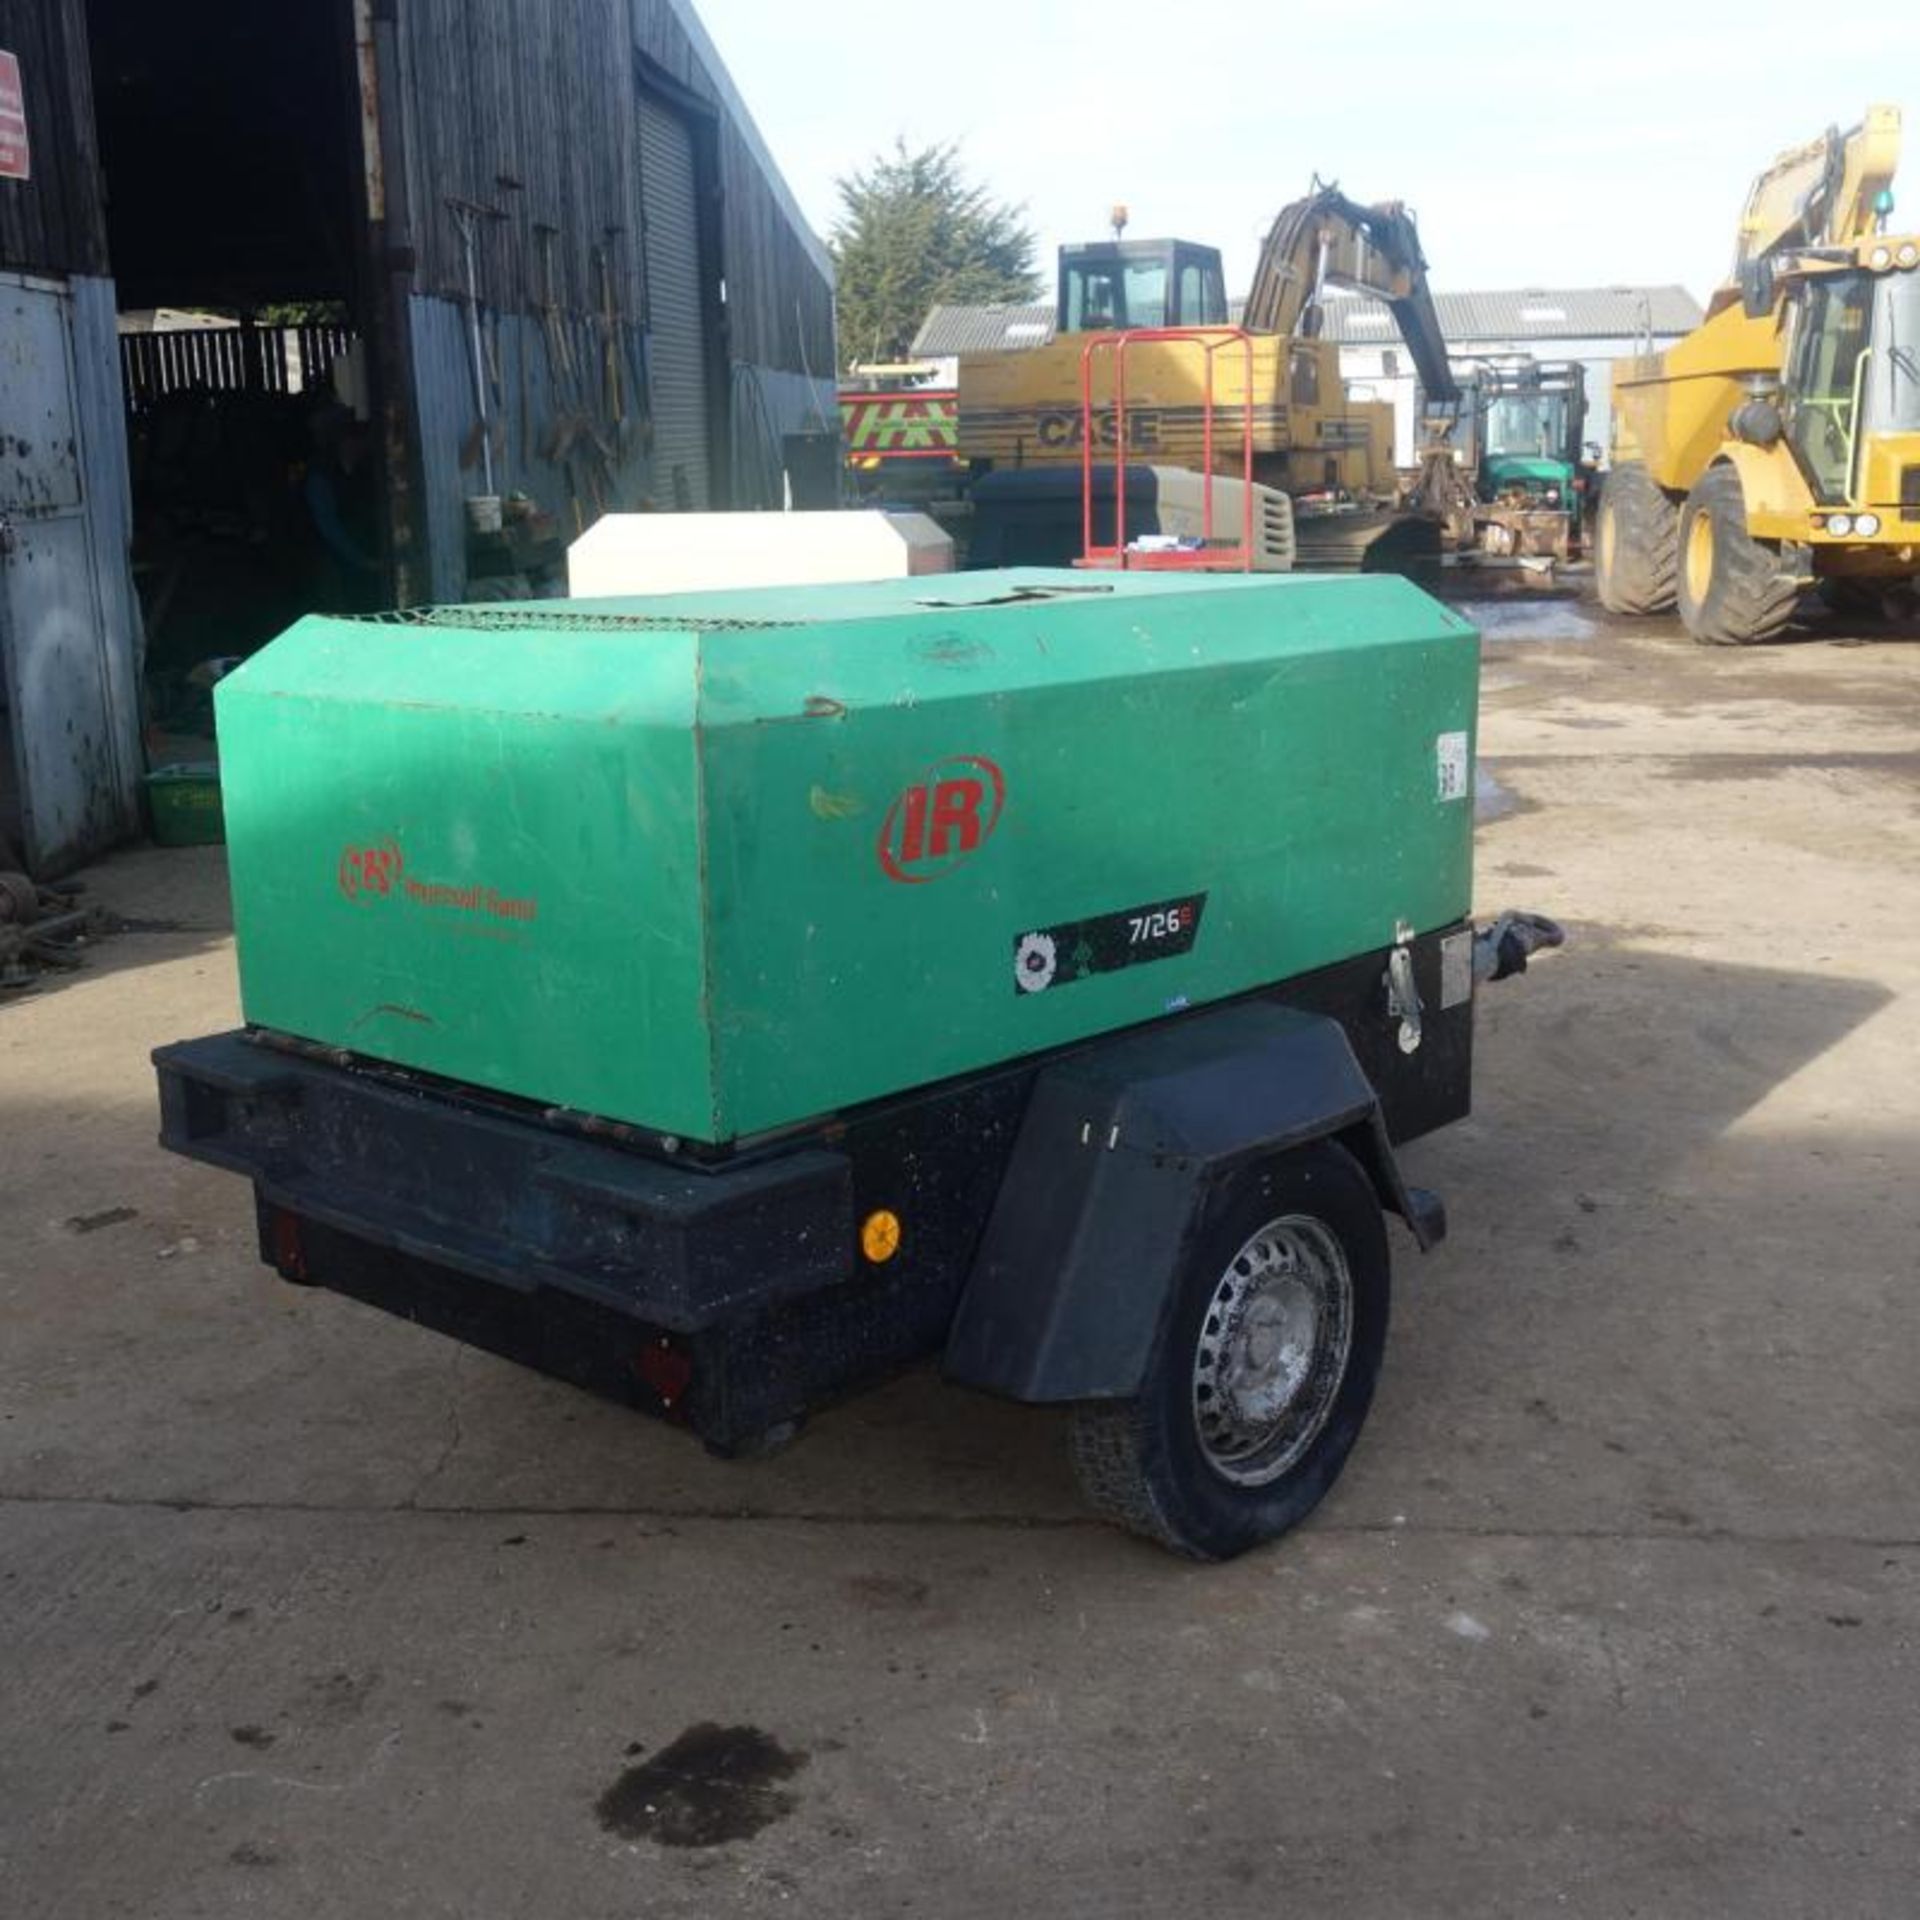 2006 Inersollrand 726e Compressor, Only 3702 Hours From New - Bild 4 aus 6